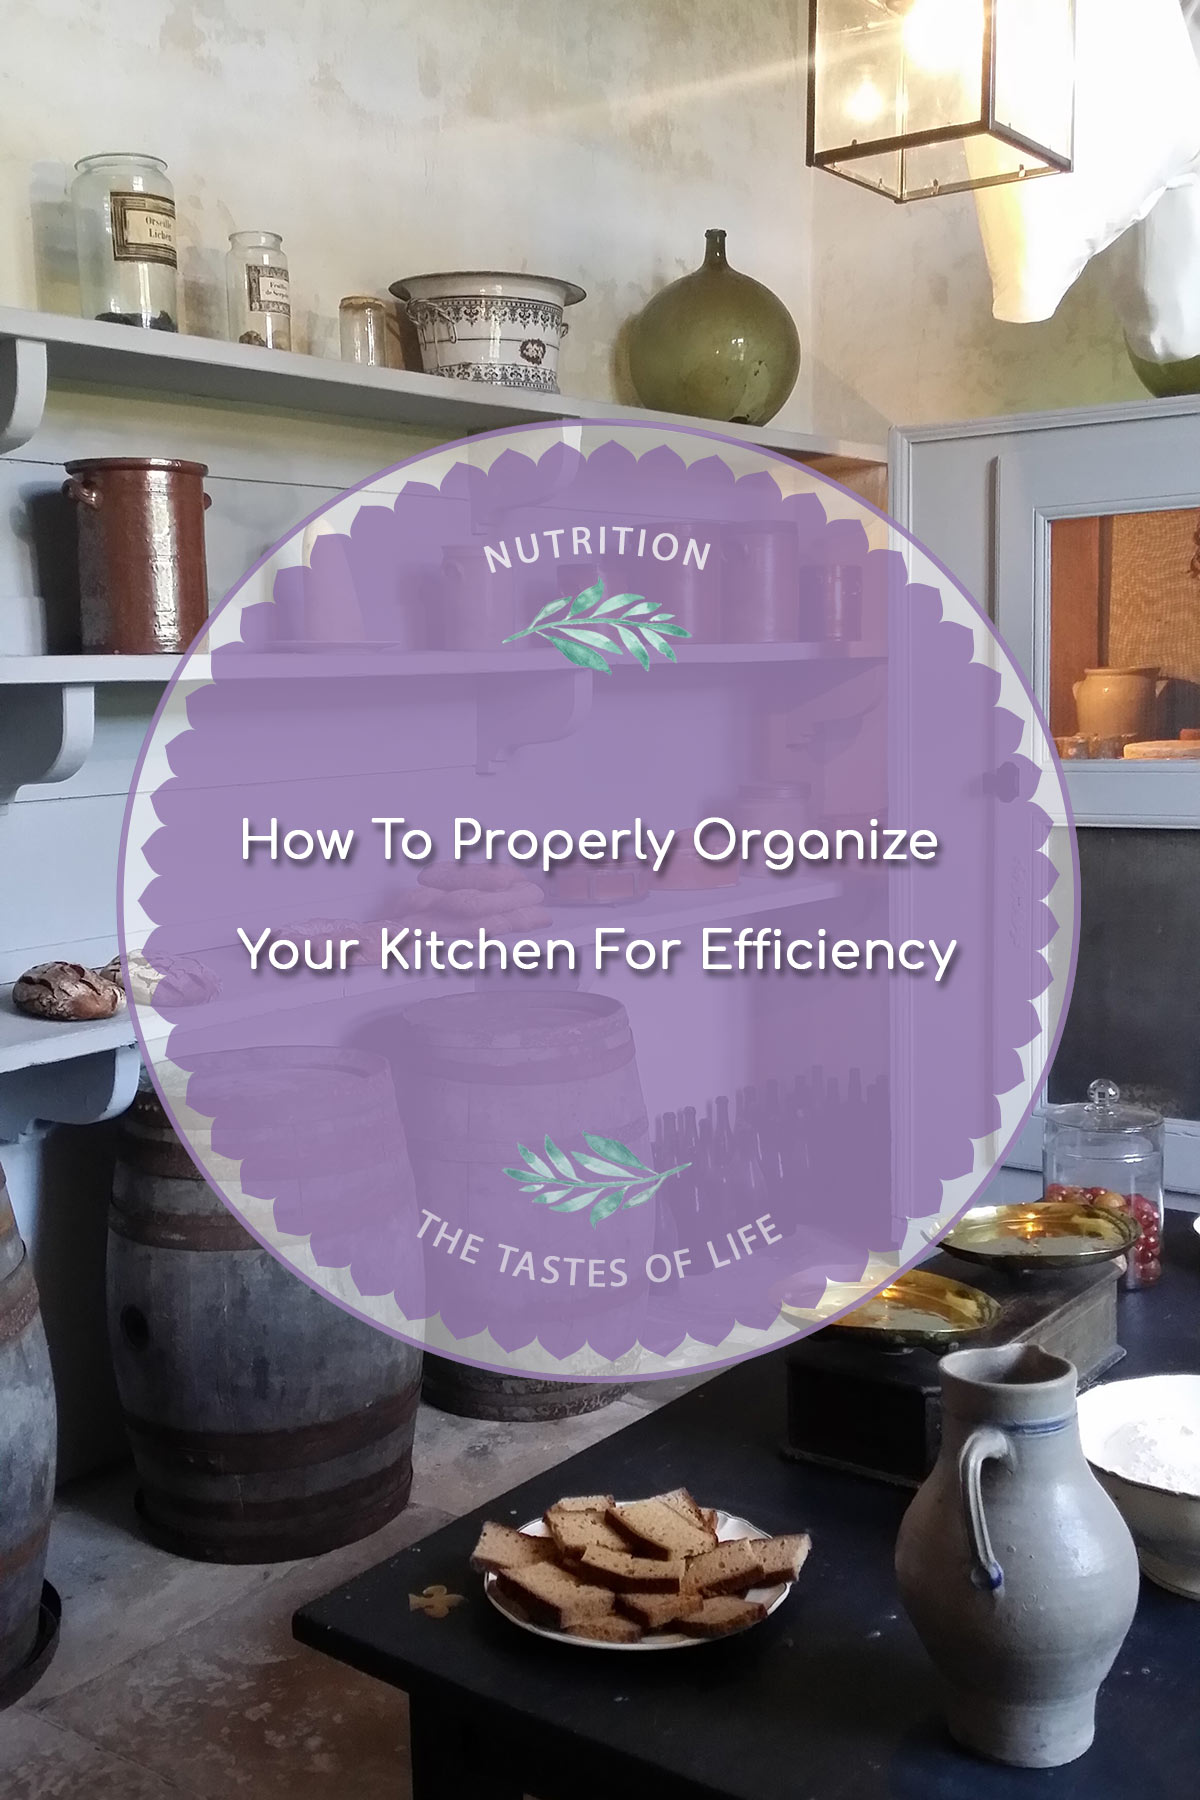 How To Properly Organize Your Kitchen For Efficiency